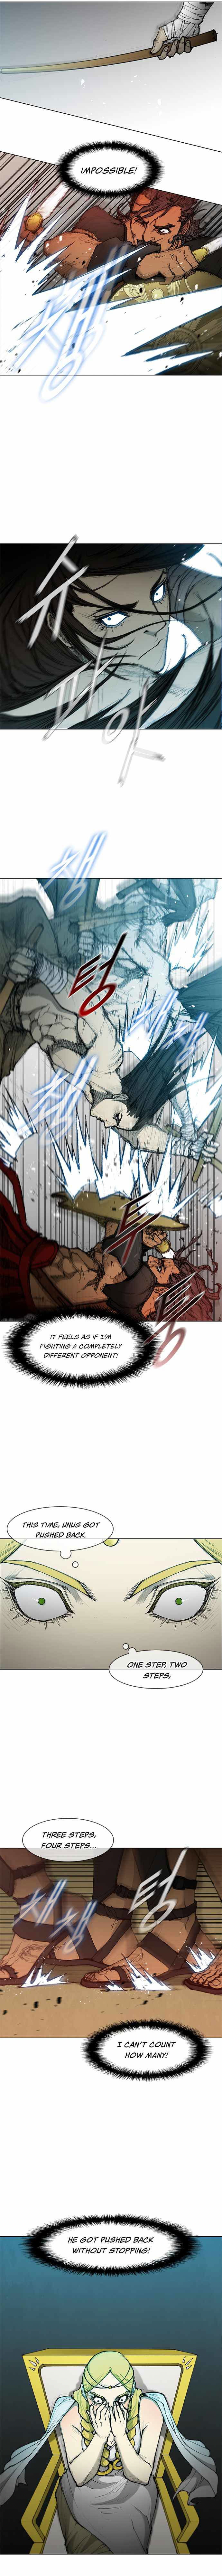 The Long Way of the Warrior Chapter 44 page 5